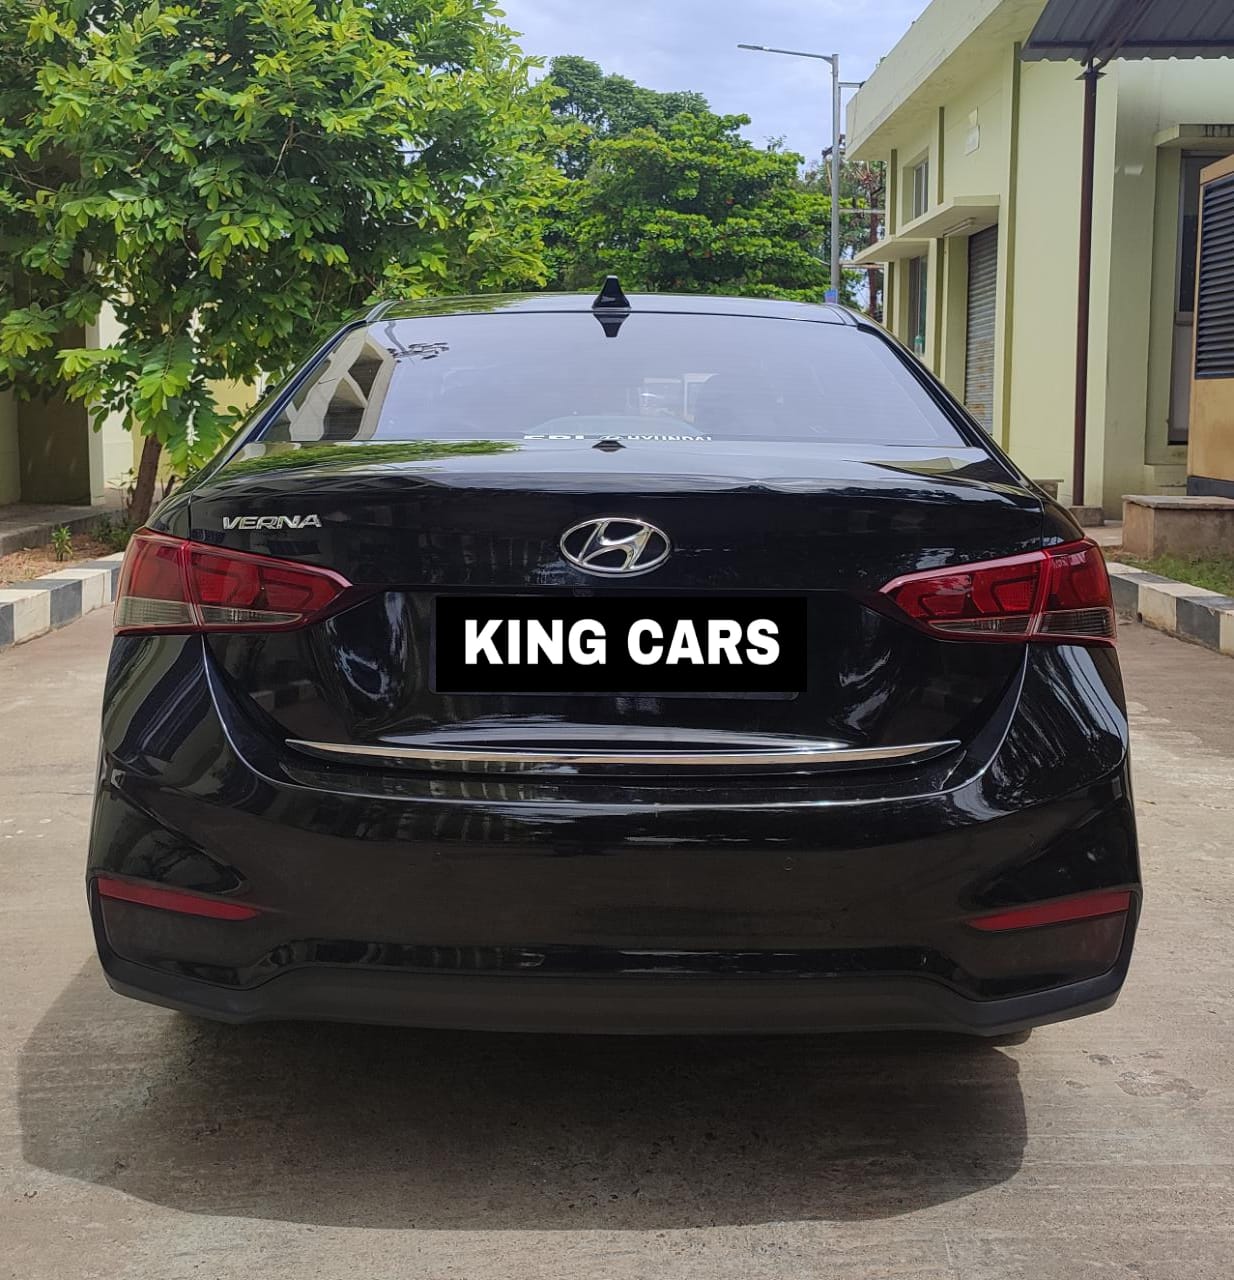 3781-for-sale-Hyundai-Verna-Fluidic-Petrol-First-Owner-2018-TN-registered-rs-784999